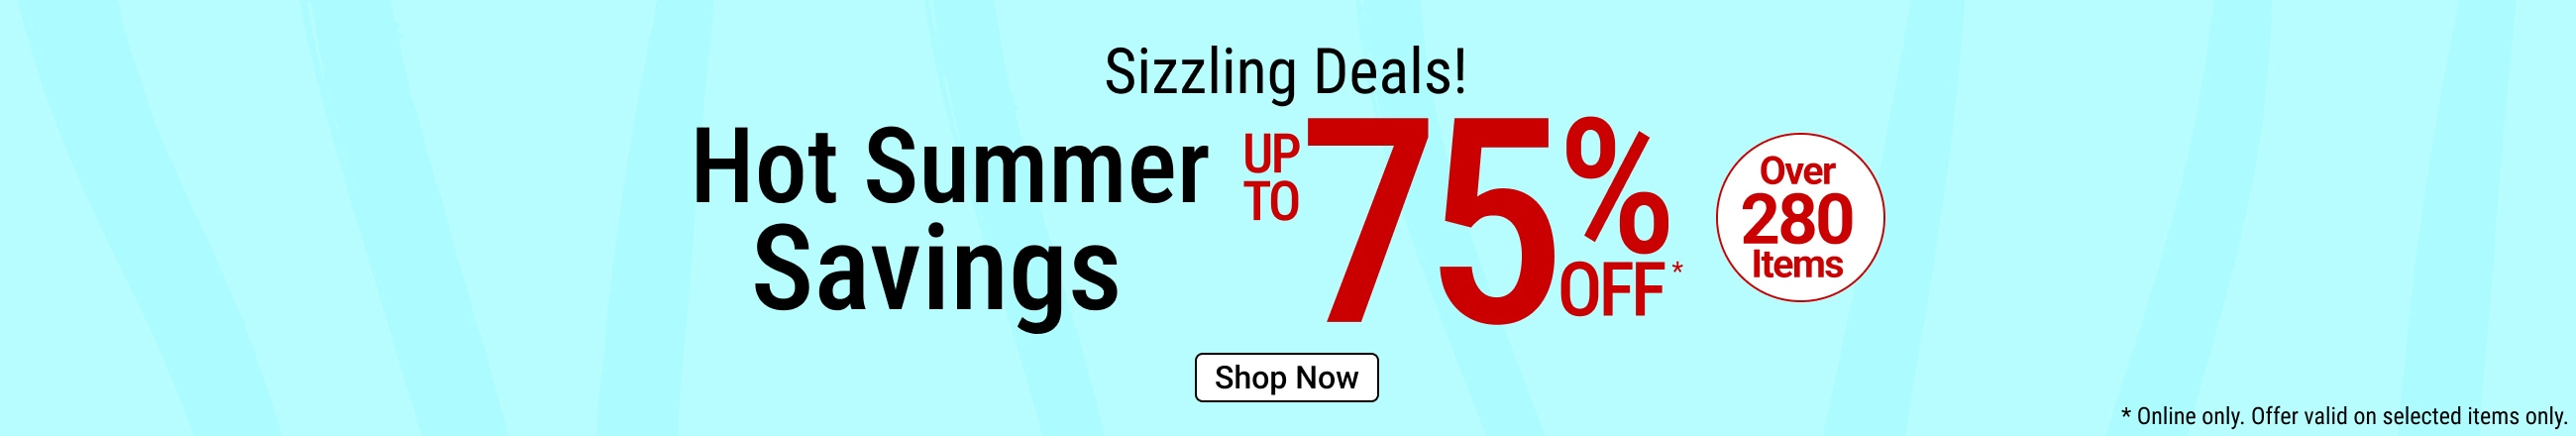 Hot summer savings up to 75% off - shop now